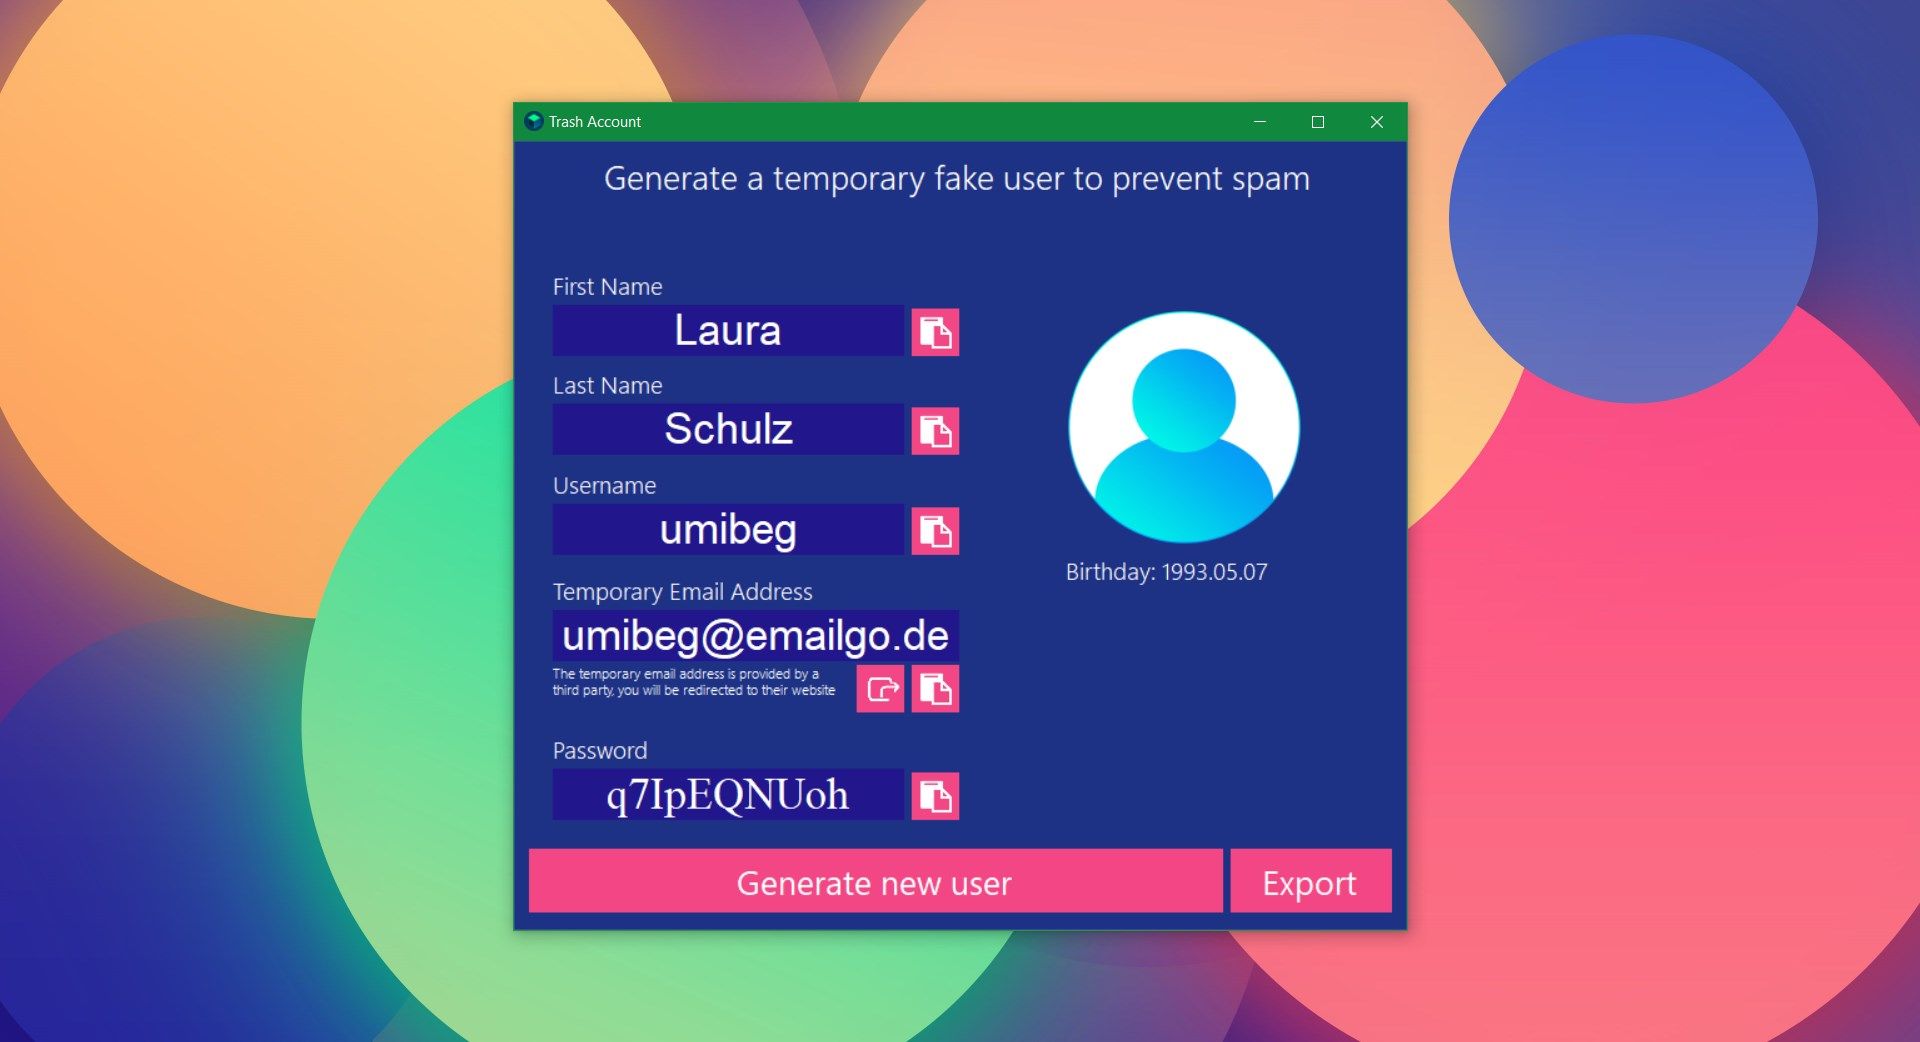 Generate Fake Users to prevent Spam